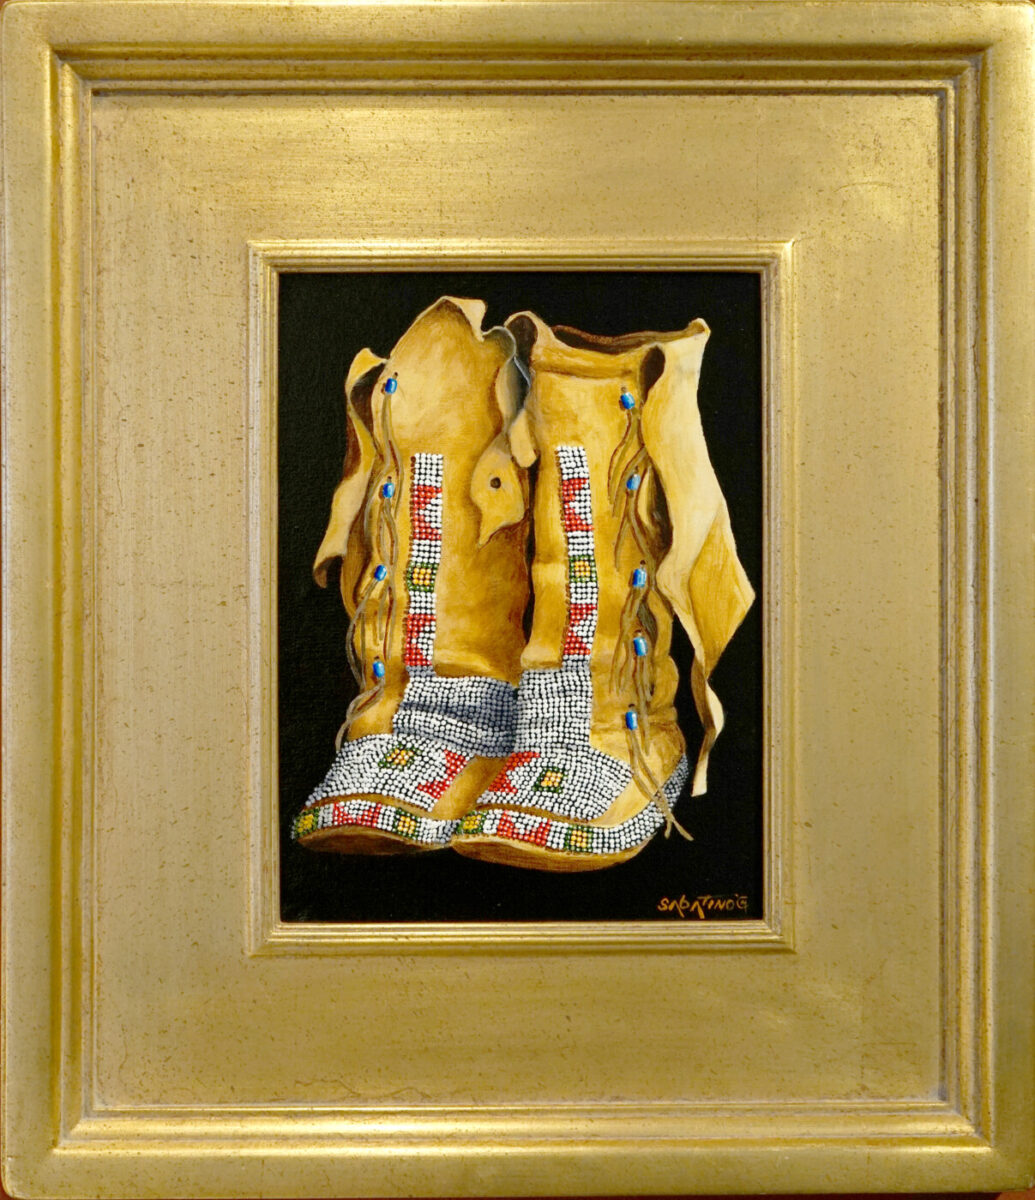 Oil painting of native American moccasins by Chuck Sabatino